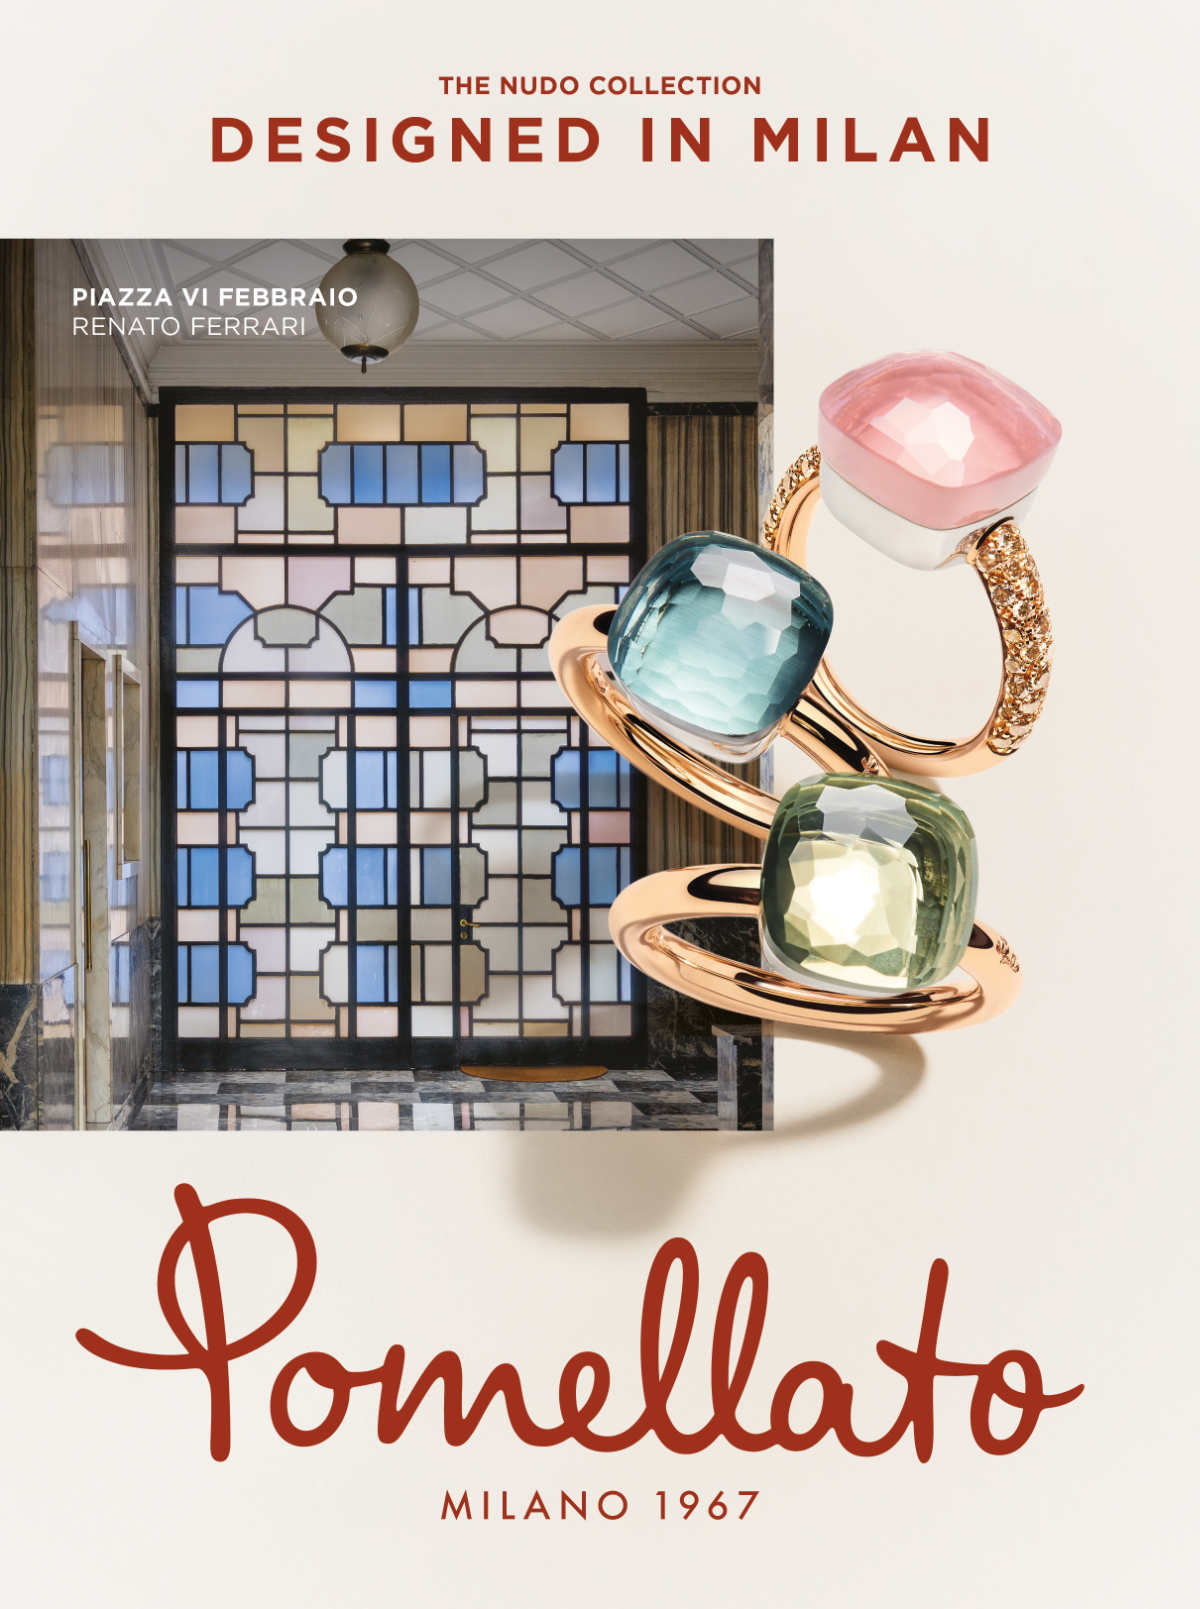 Pomellato Unveiled Its New Global Advertising Campaign Celebrating Milan’s Creative Genius